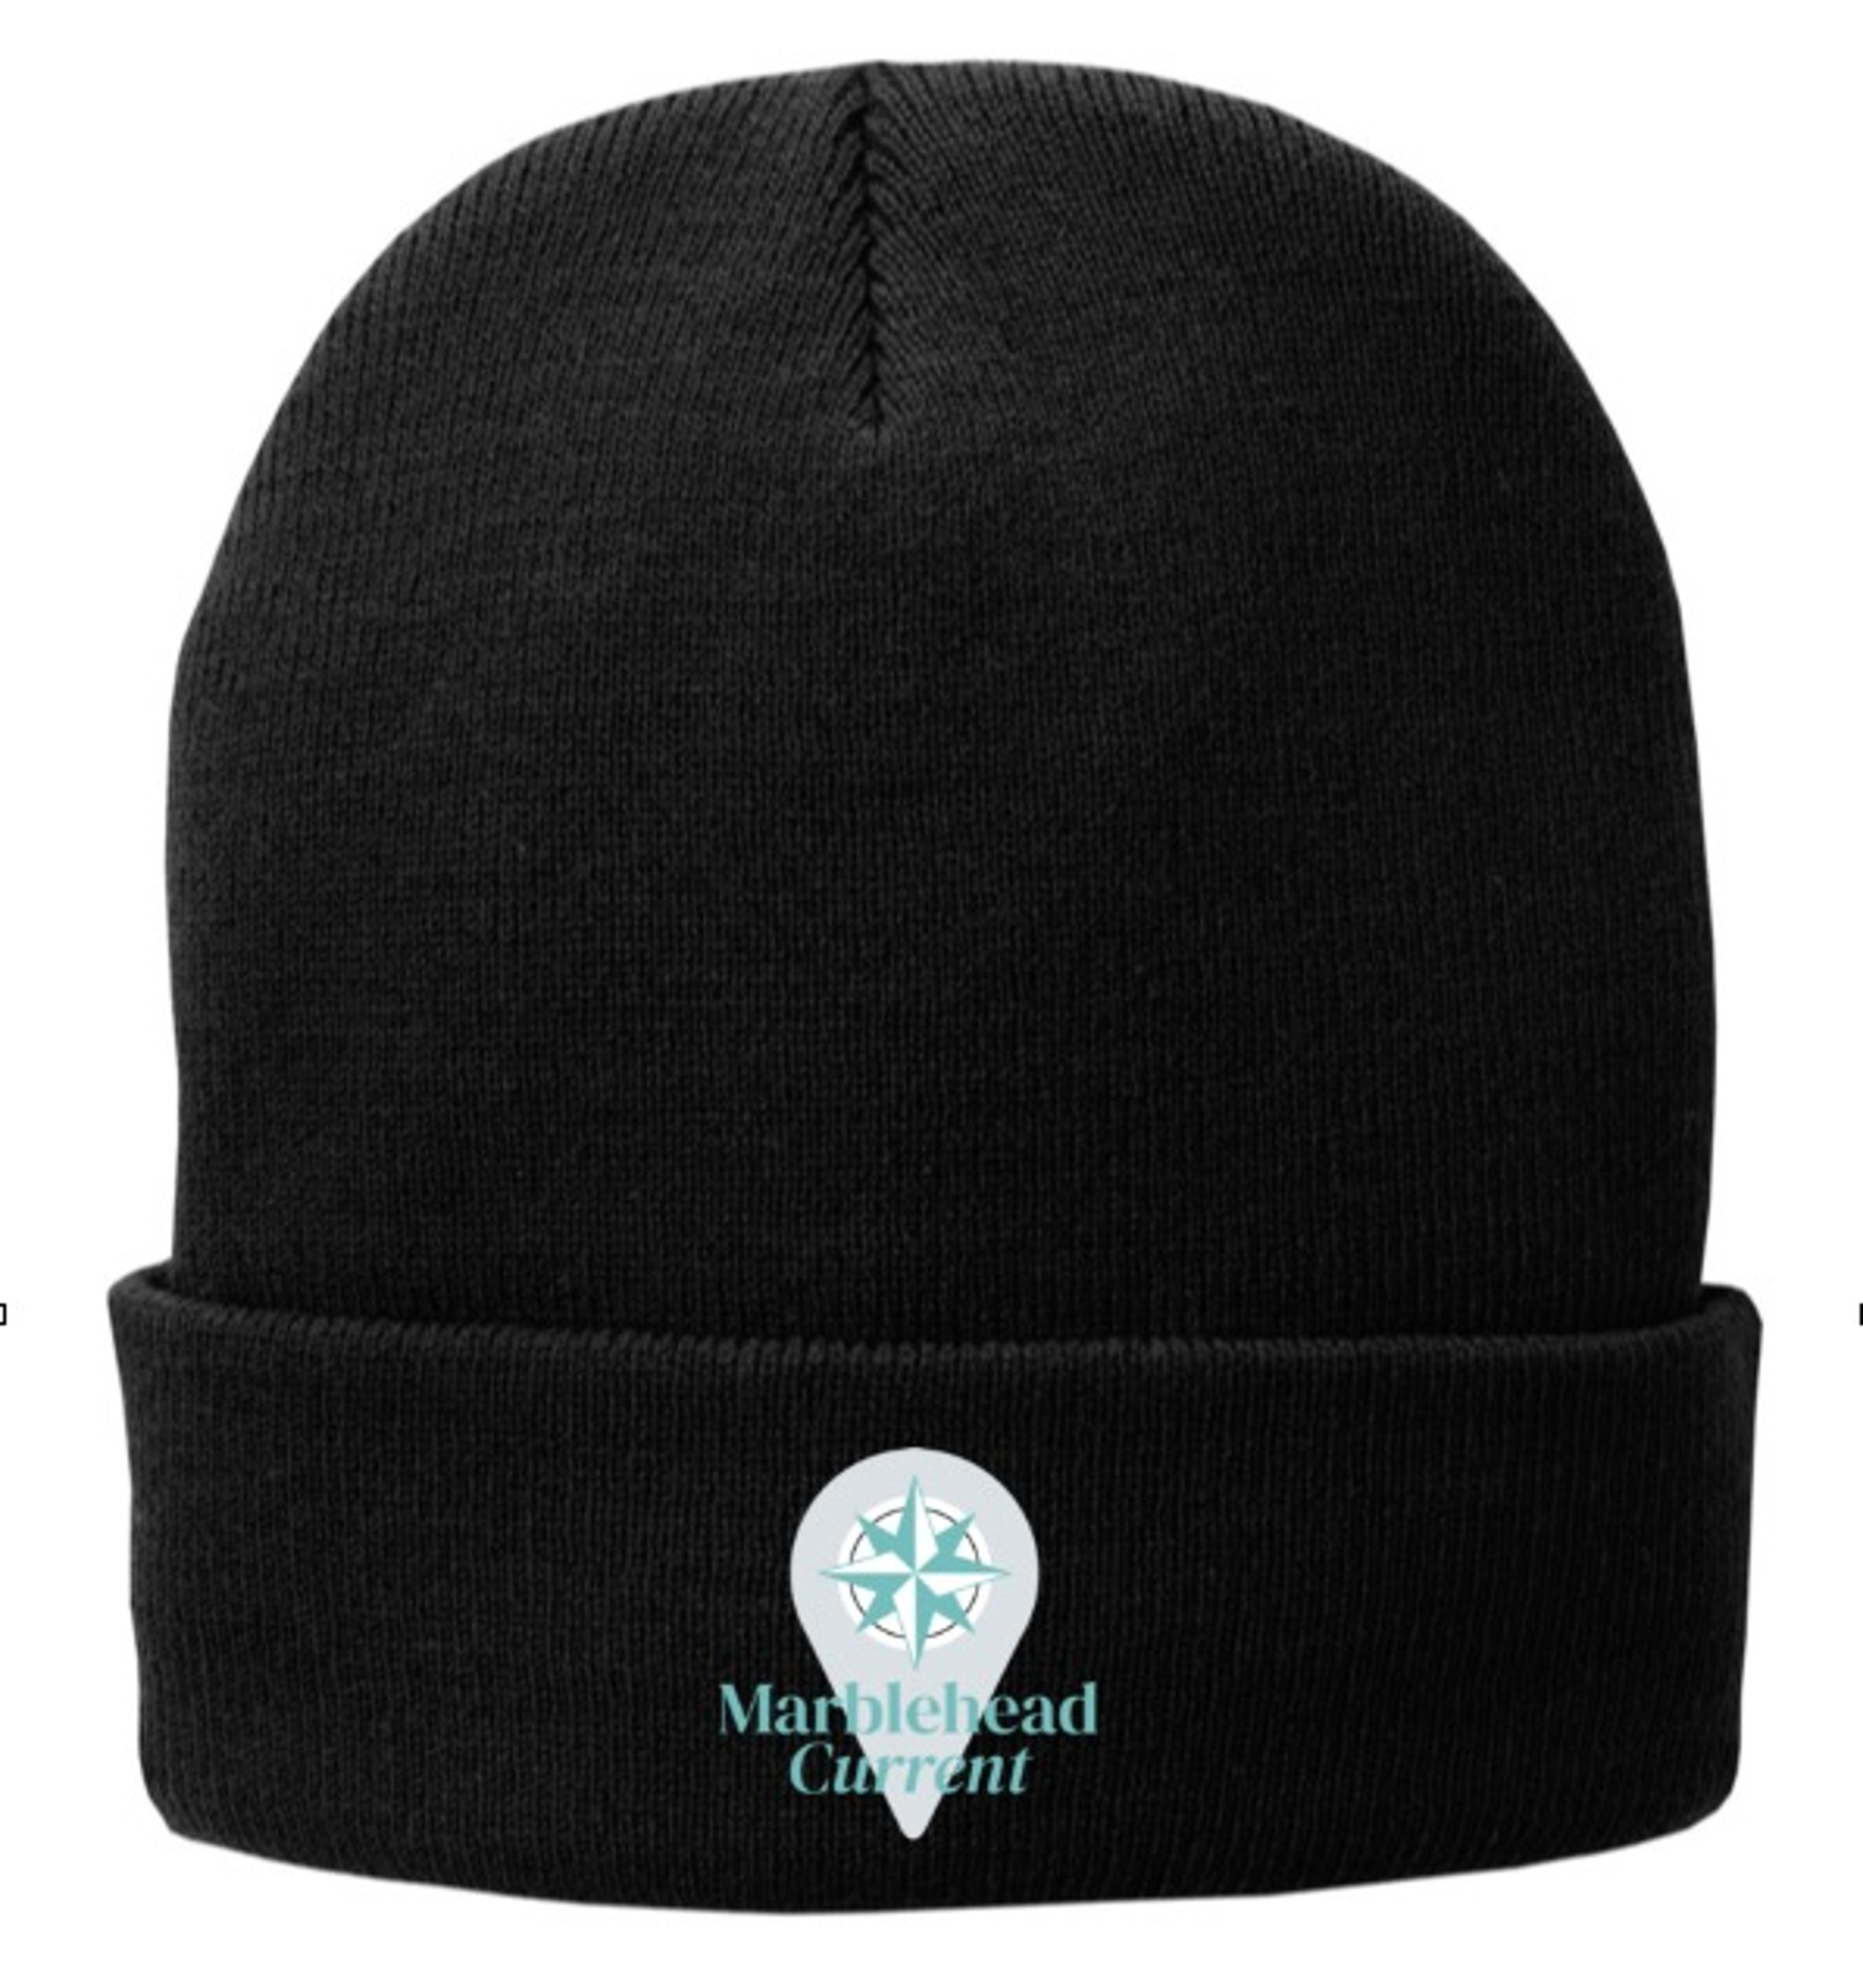 Marblehead Current Fleece-Lined Beanie